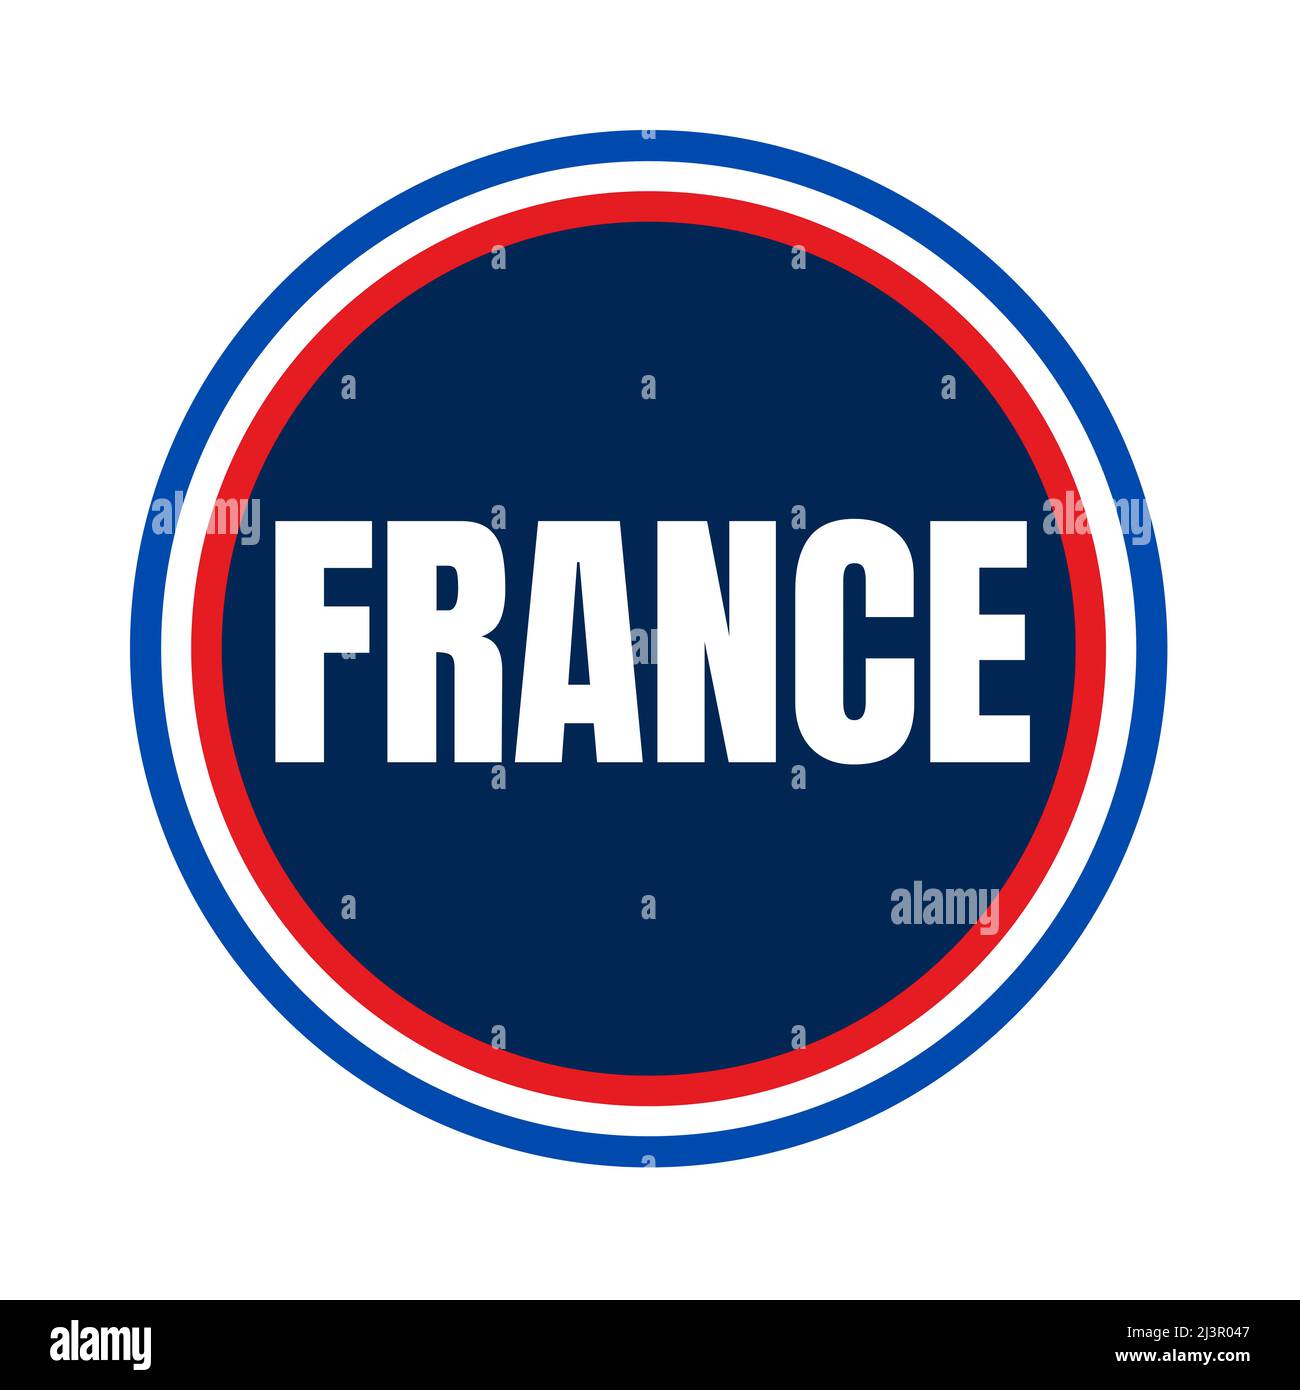 France symbol icon illustration with a white background Stock Photo